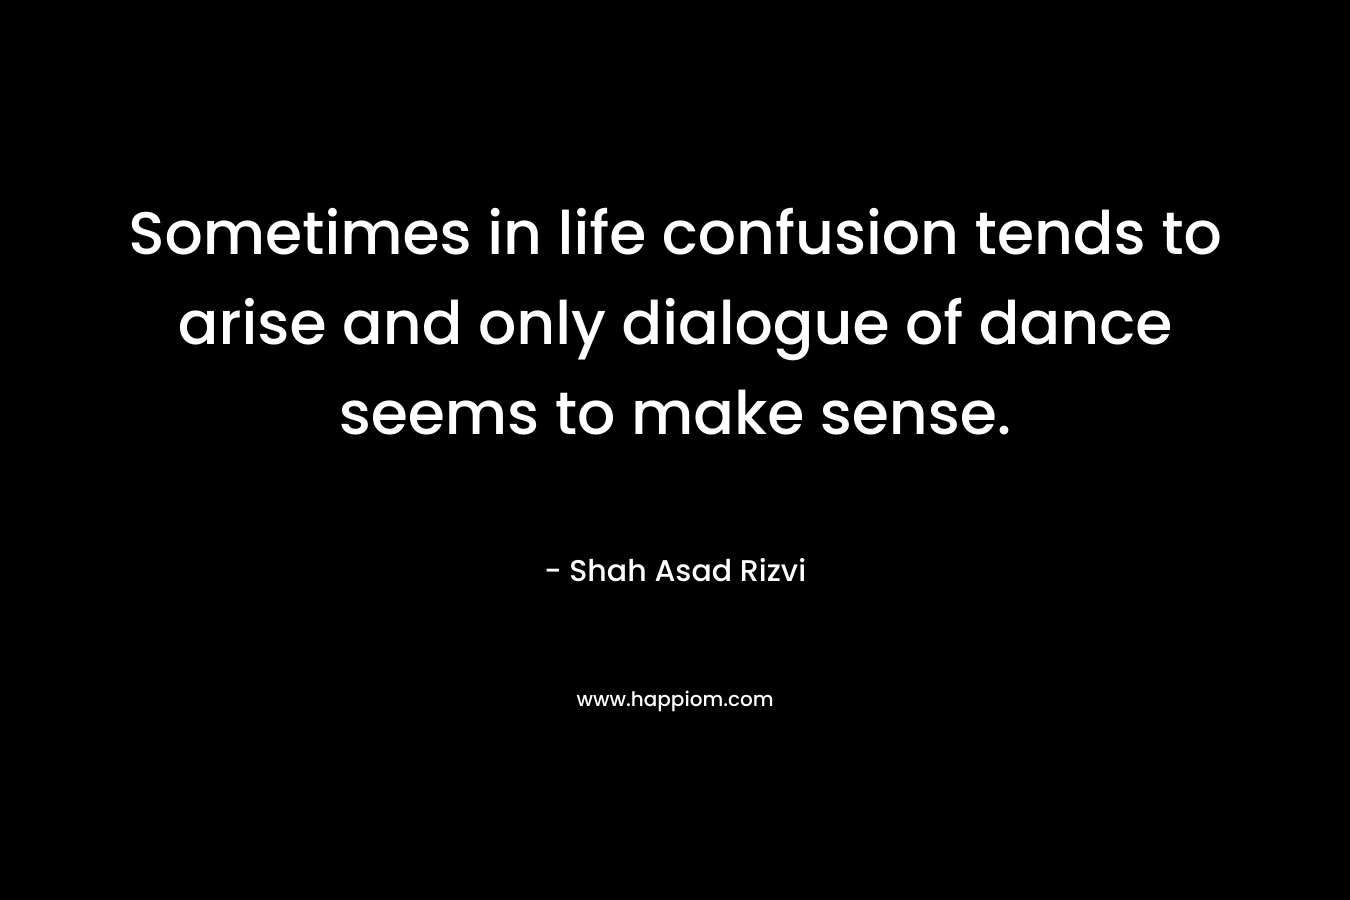 Sometimes in life confusion tends to arise and only dialogue of dance seems to make sense.